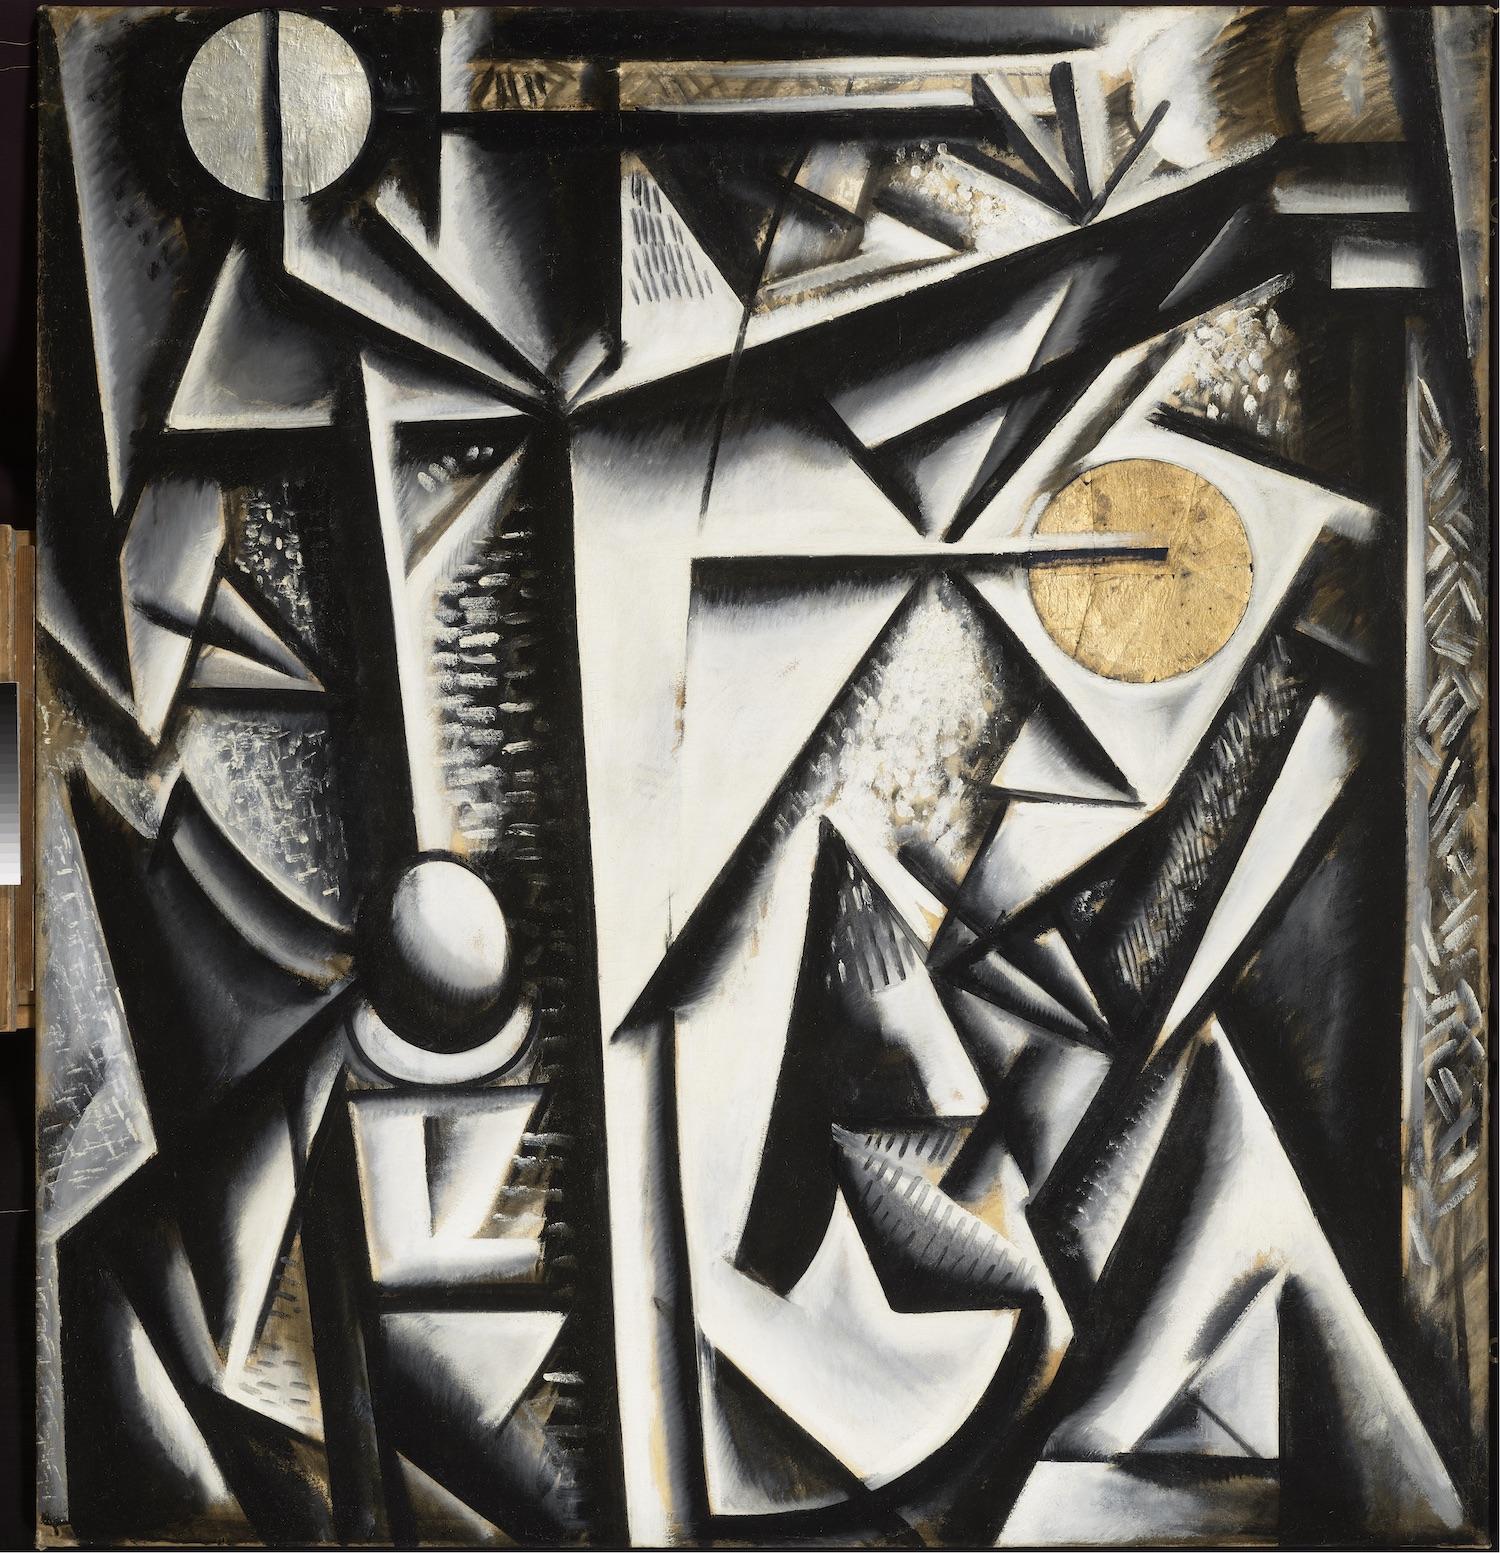 Béla Uitz: Icon Analysis (Annunciation), 1921/1922. Oil on canvas, 153×144 cm. Private Collection